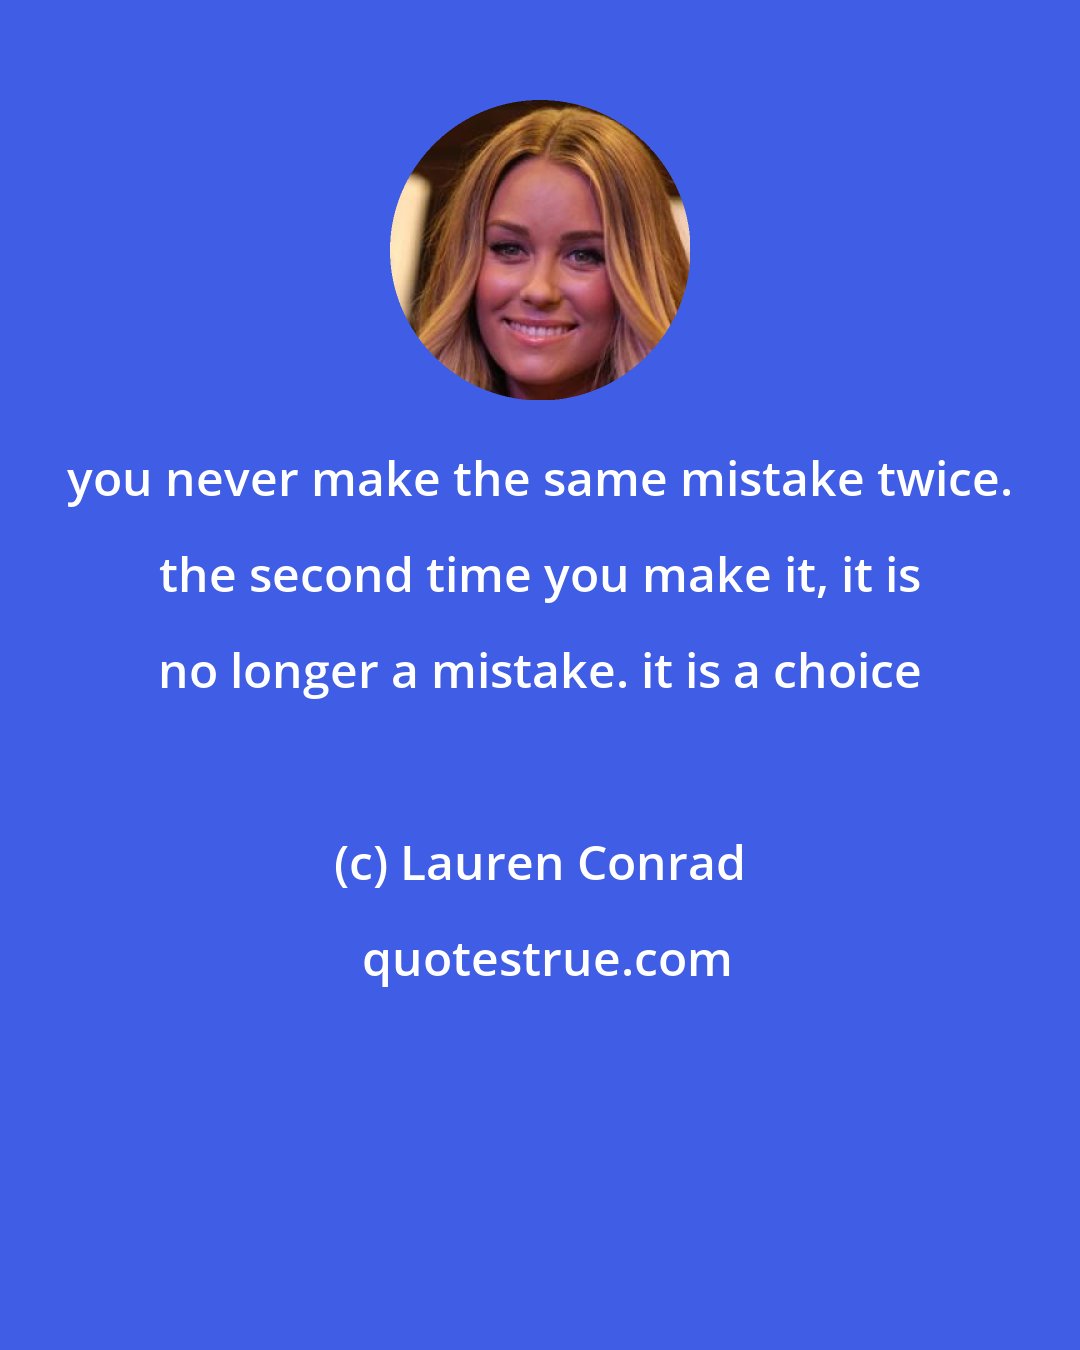 Lauren Conrad: you never make the same mistake twice. the second time you make it, it is no longer a mistake. it is a choice